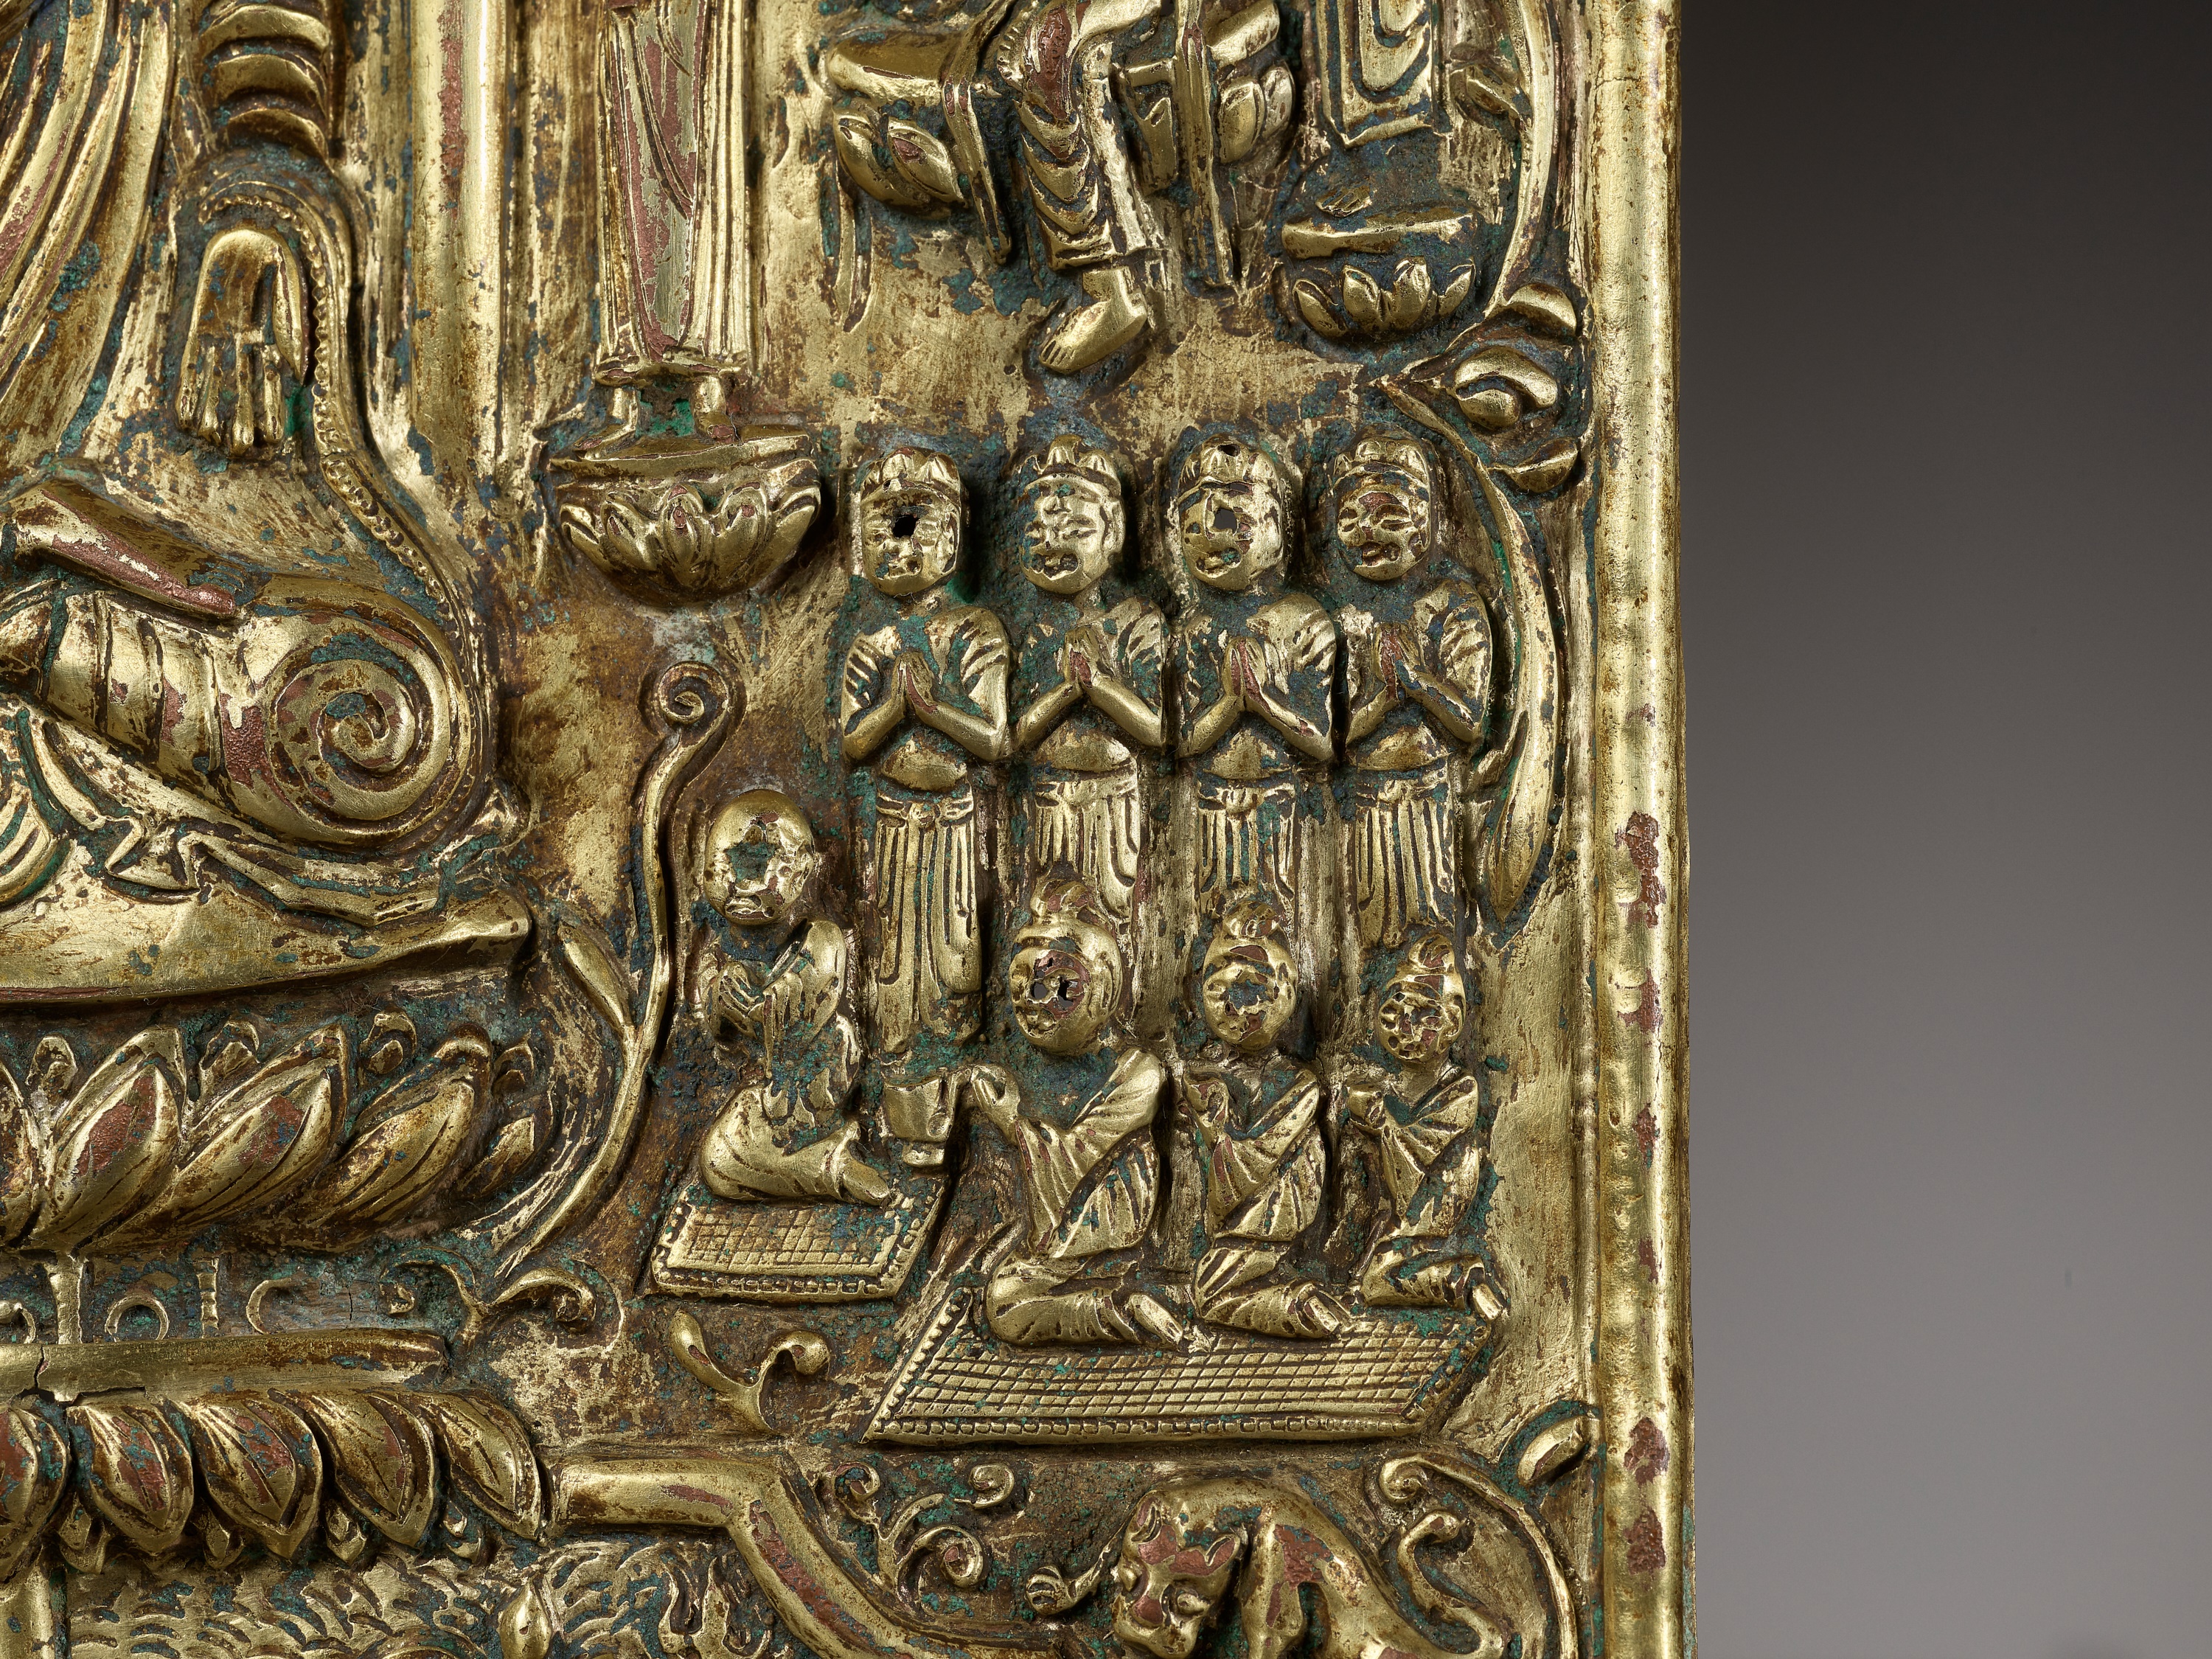 A LARGE AND IMPORTANT BUDDHIST VOTIVE PLAQUE, GILT COPPER REPOUSSE, EARLY TANG DYNASTY - Image 18 of 21